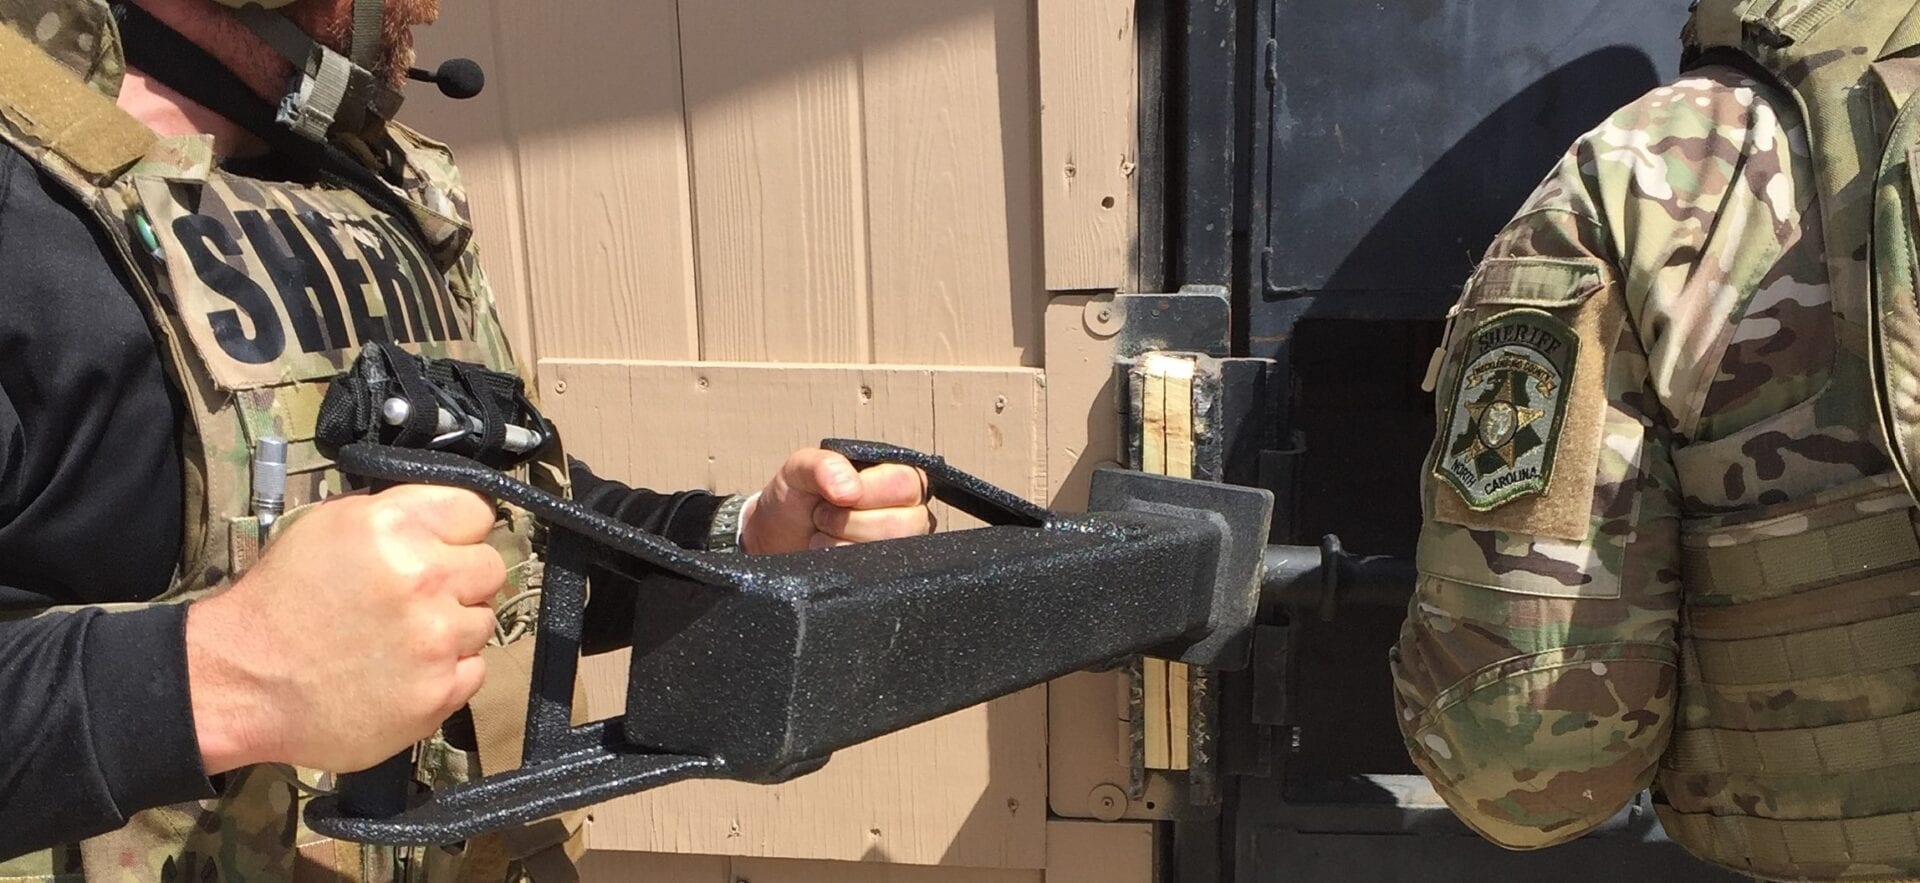 A man in a military uniform is using the TR-1 BREACHING RAM to open a door.